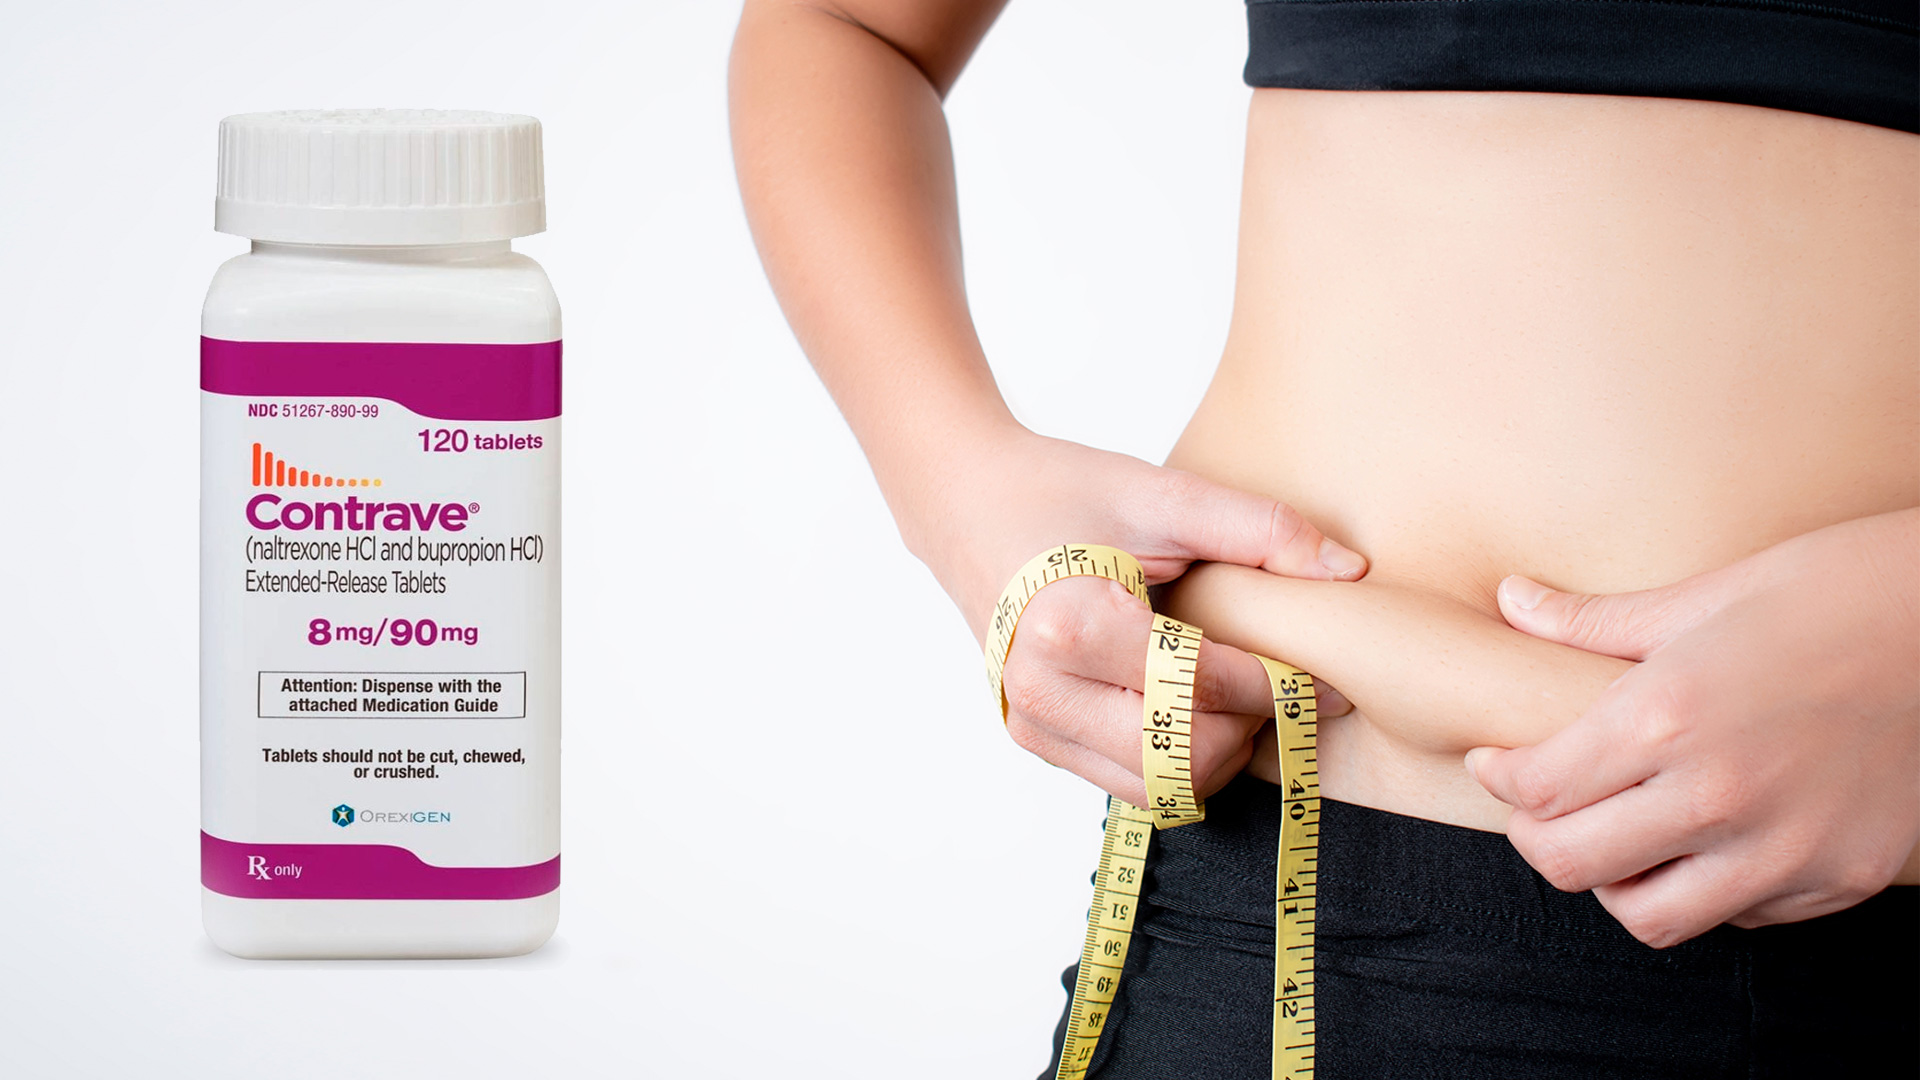 How to lose weight with Contrave how does it work? Is it safe? a